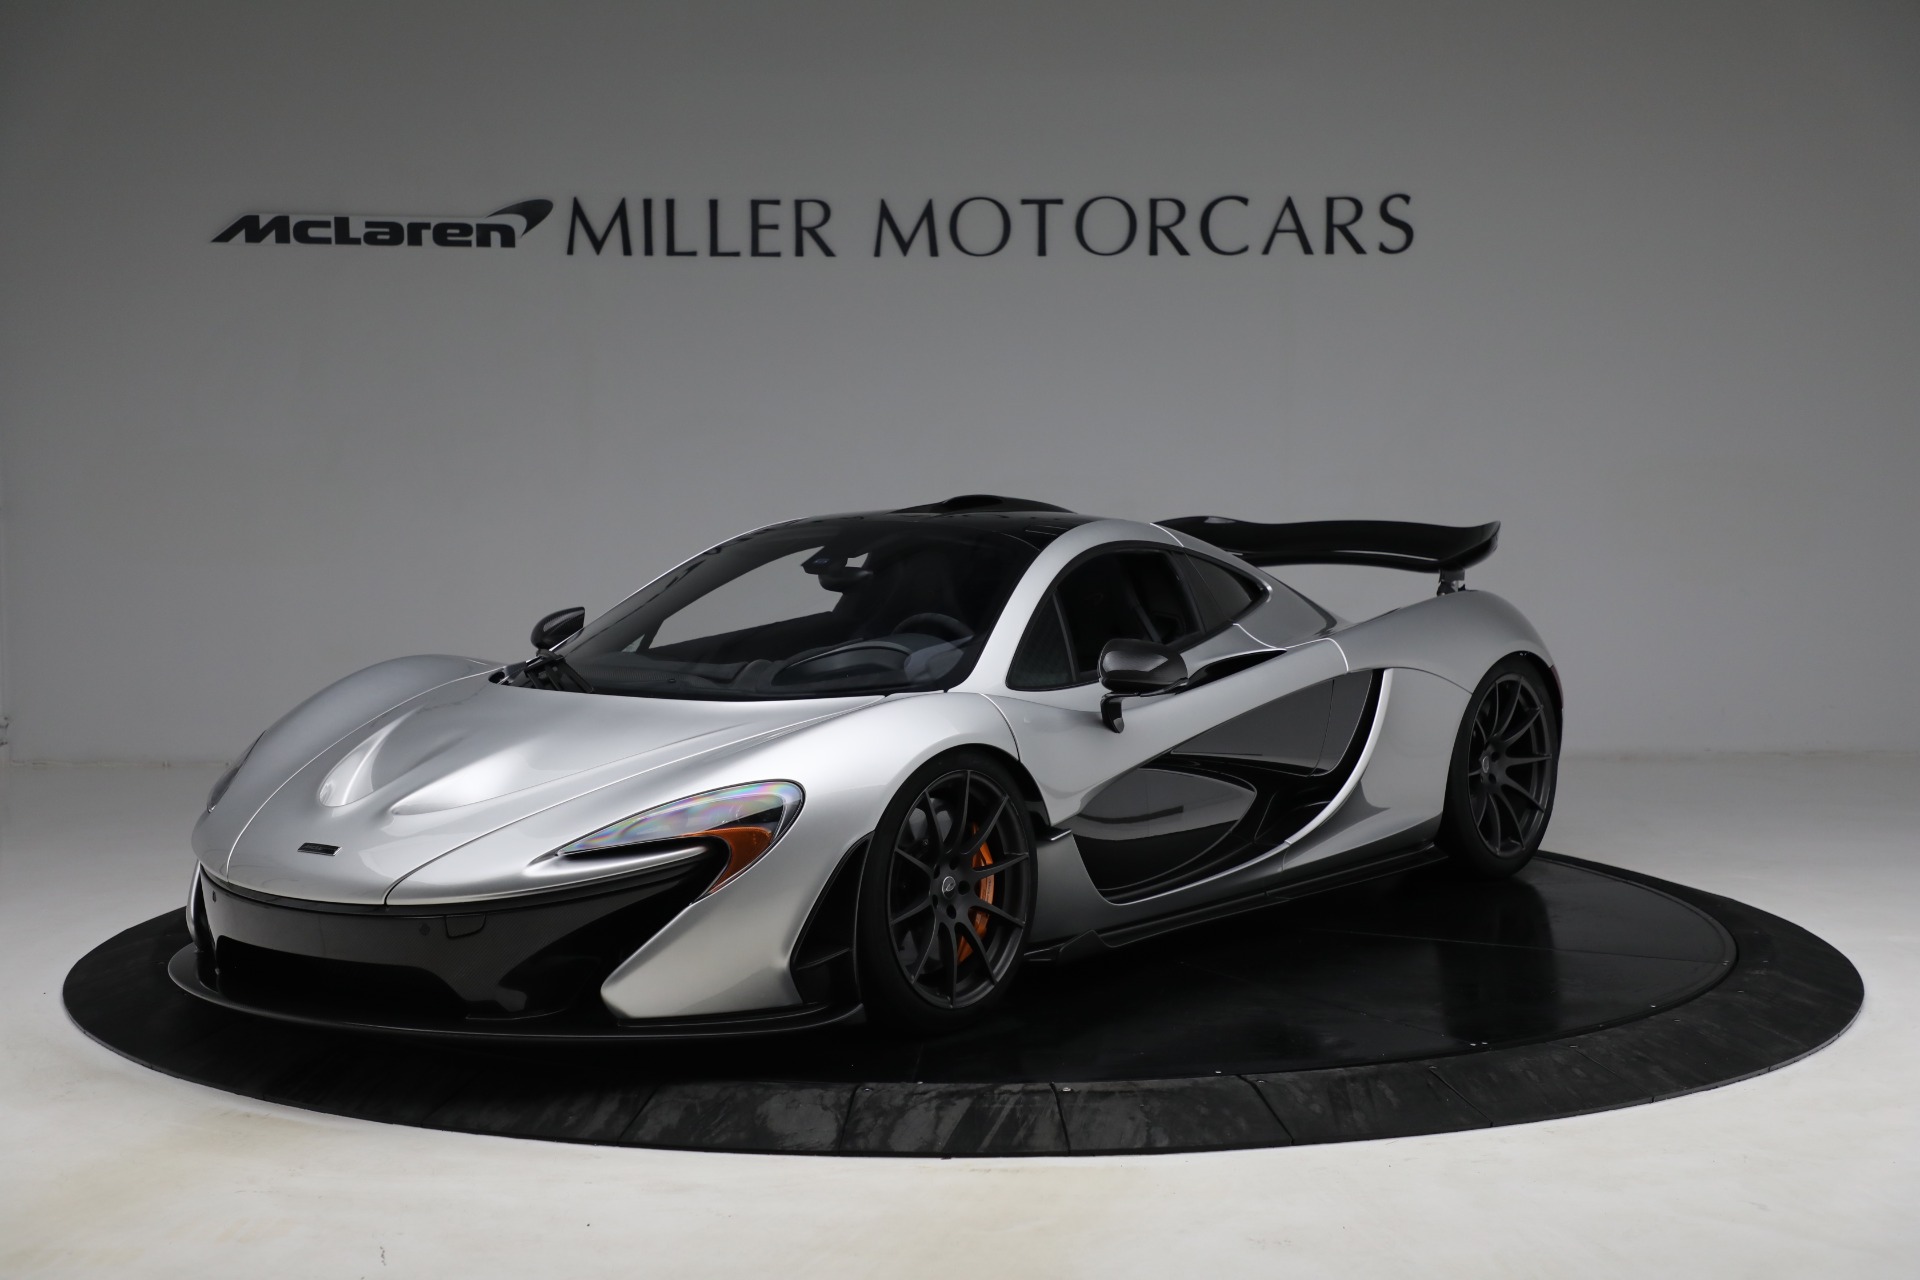 Used 2015 McLaren P1 for sale Call for price at Bentley Greenwich in Greenwich CT 06830 1